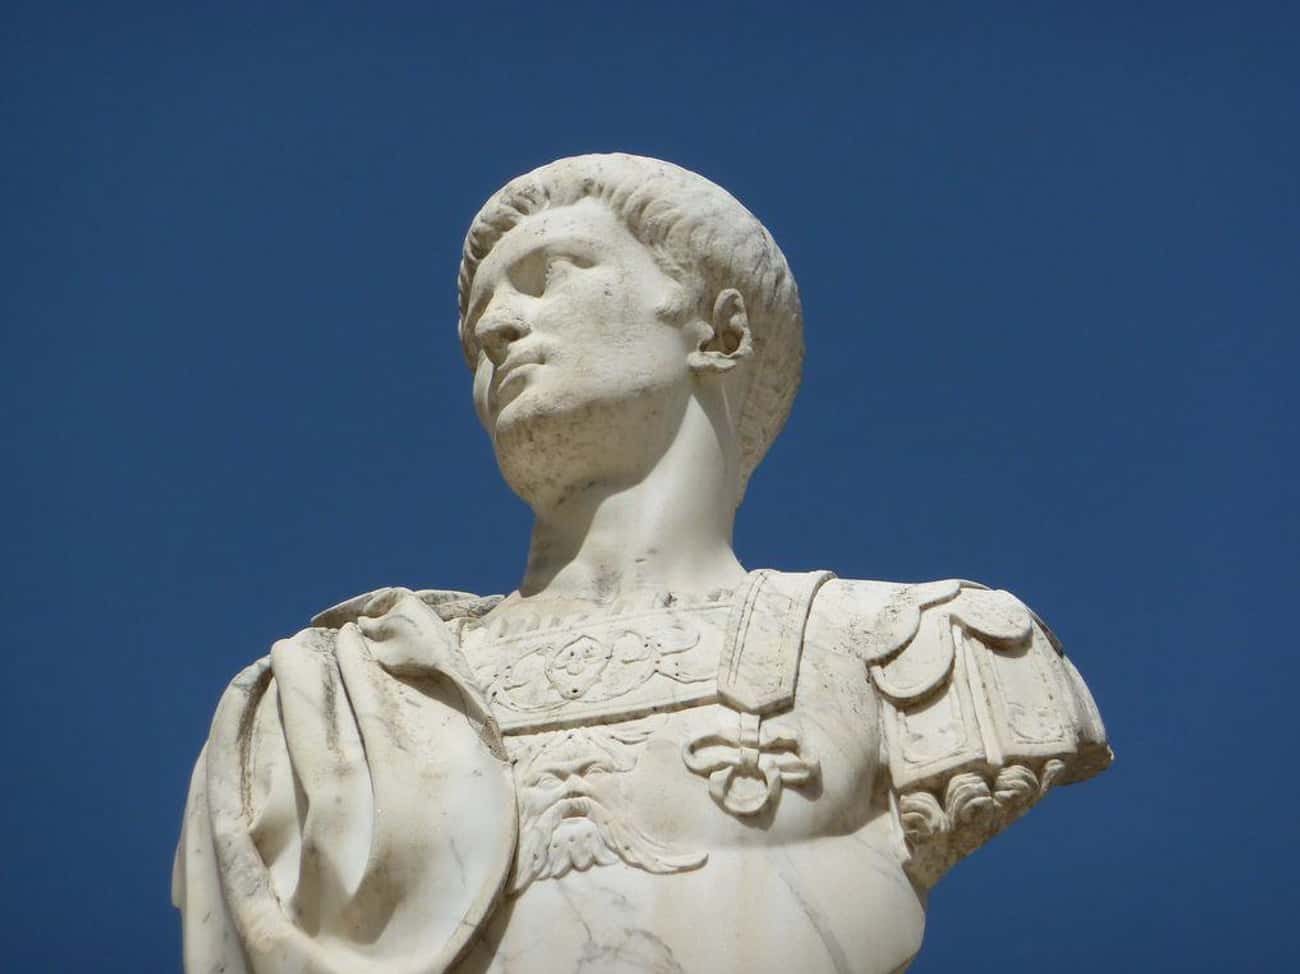 Caligula Was The Unpredictable And Outrageous Roman Emperor From 37-41 AD